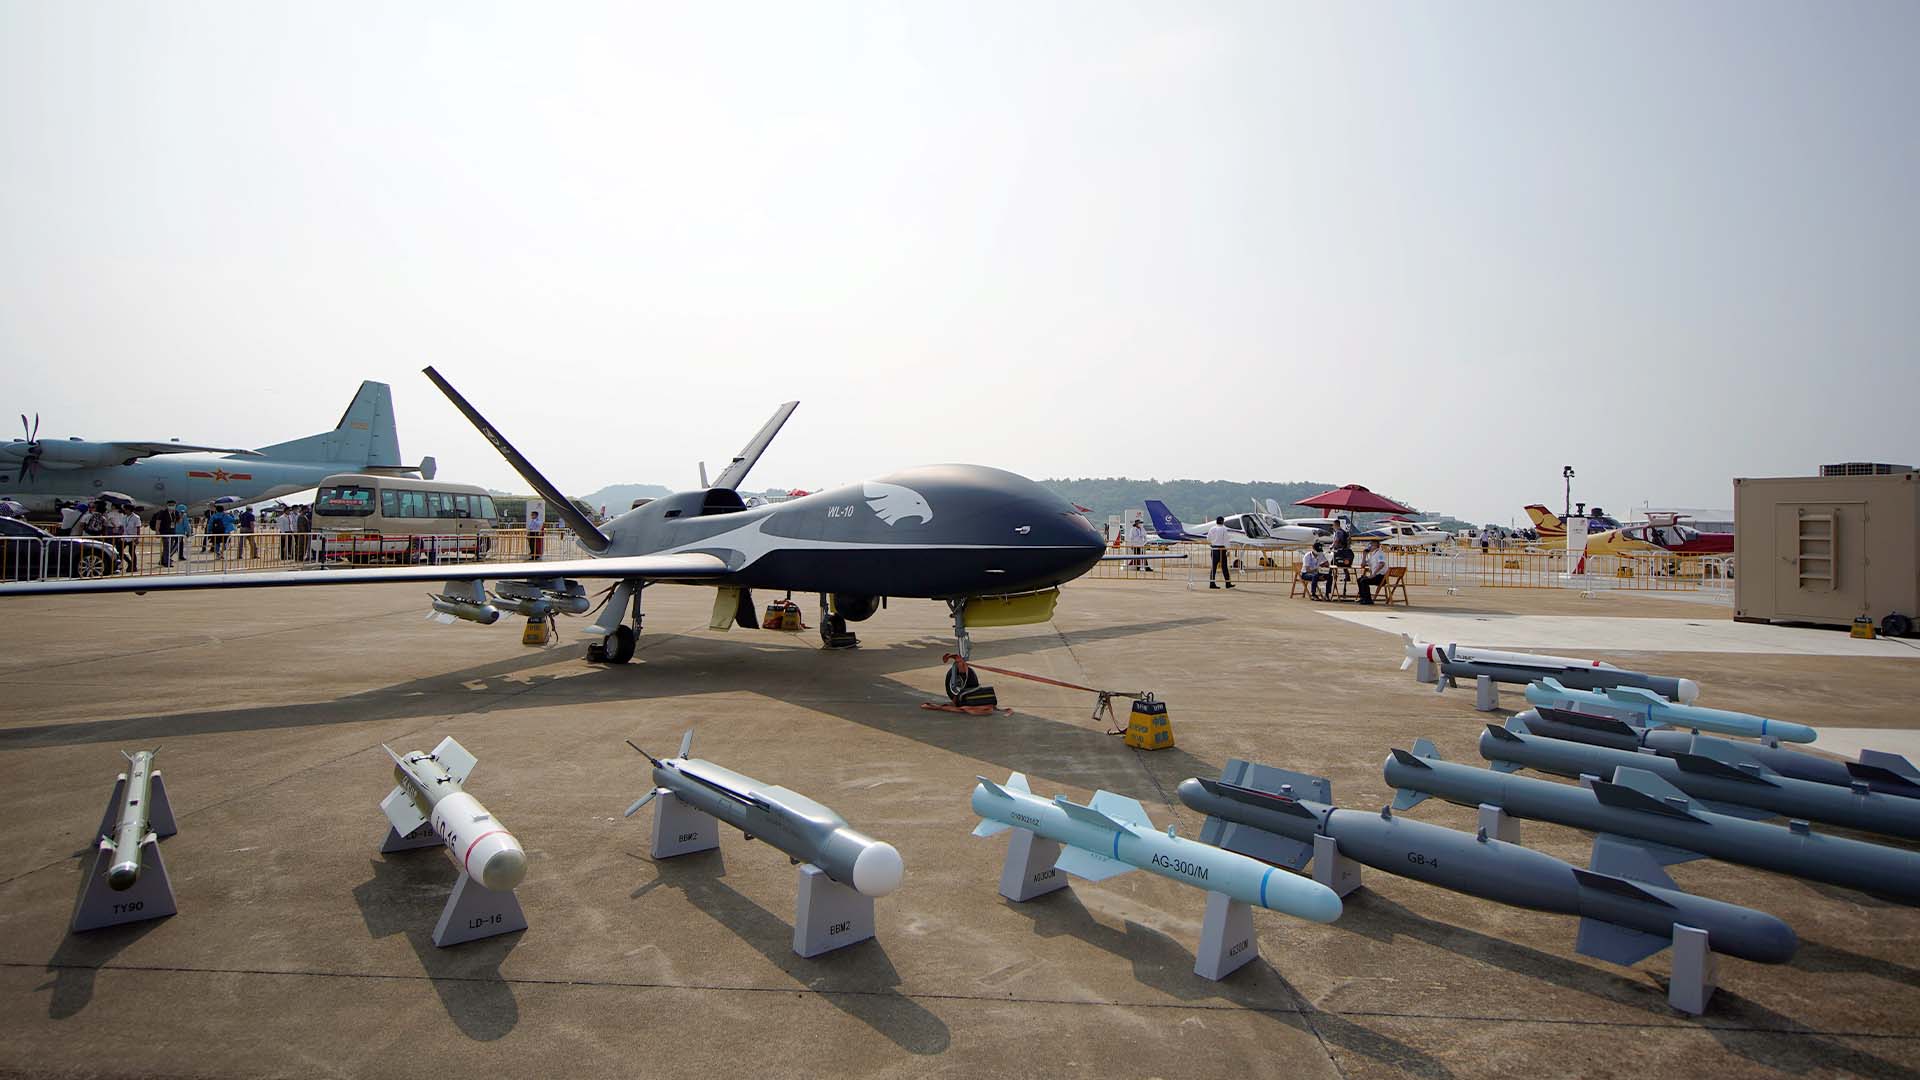 China's world-first drone carrier is a new species' using AI for unmanned intelligence | South China Morning Post